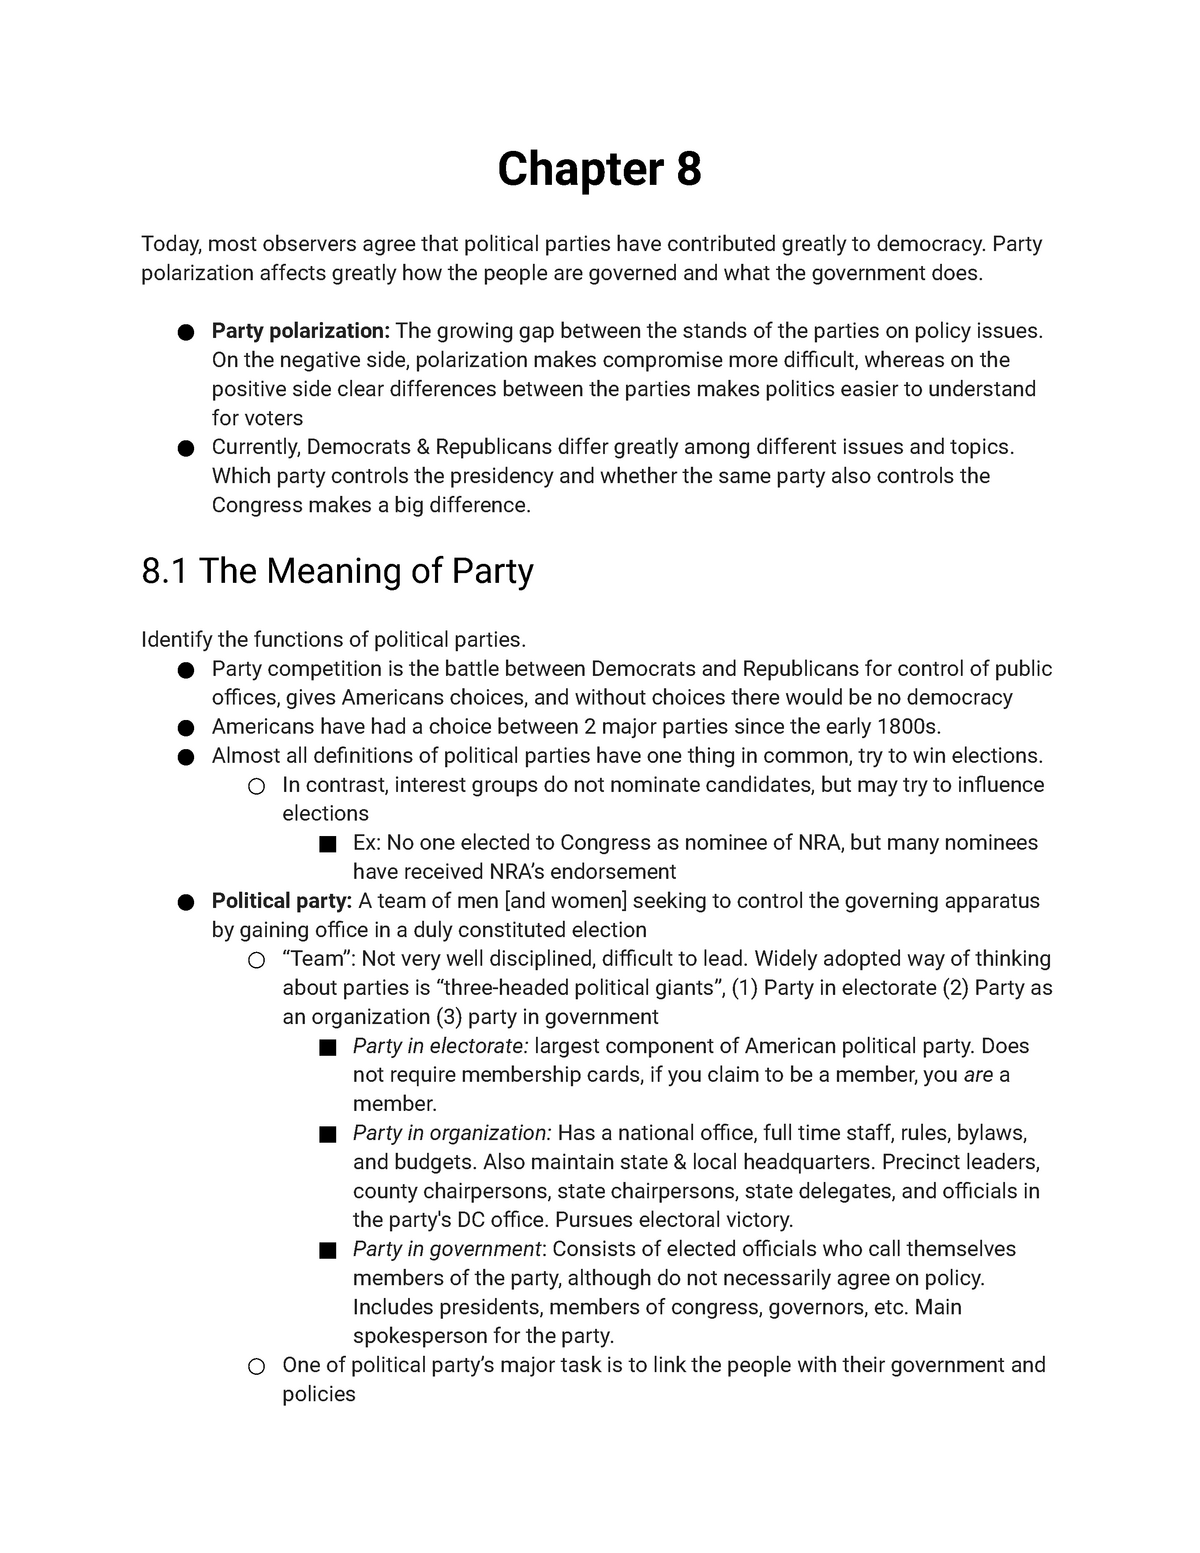 Chapter 8 Political Parties (unfinished) - Chapter 8 Today, most ...